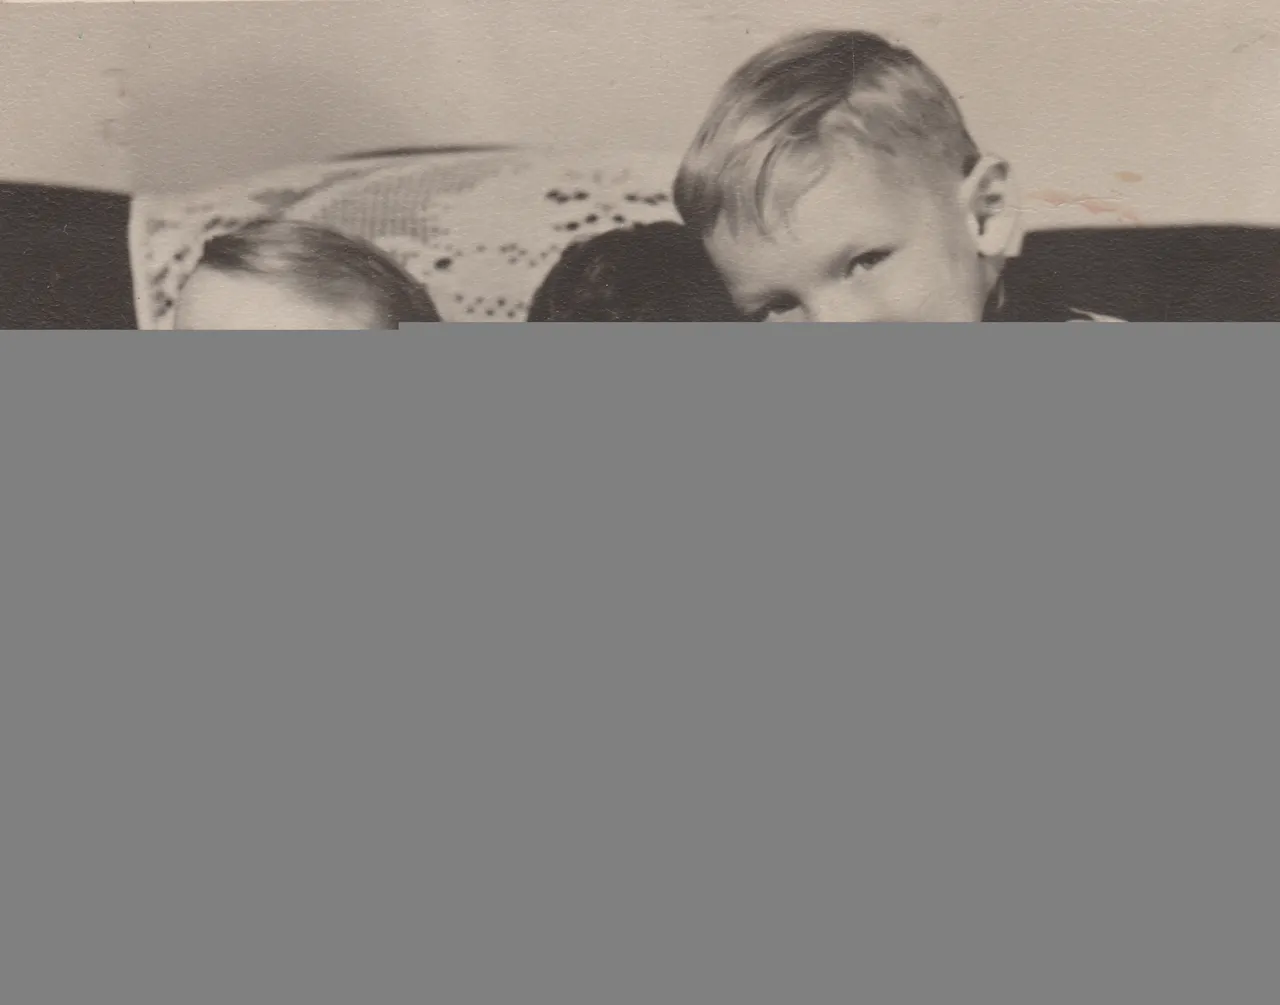 1955 maybe - Don and his adopted Arnold family brothers in Goldhill, Oregon.jpg